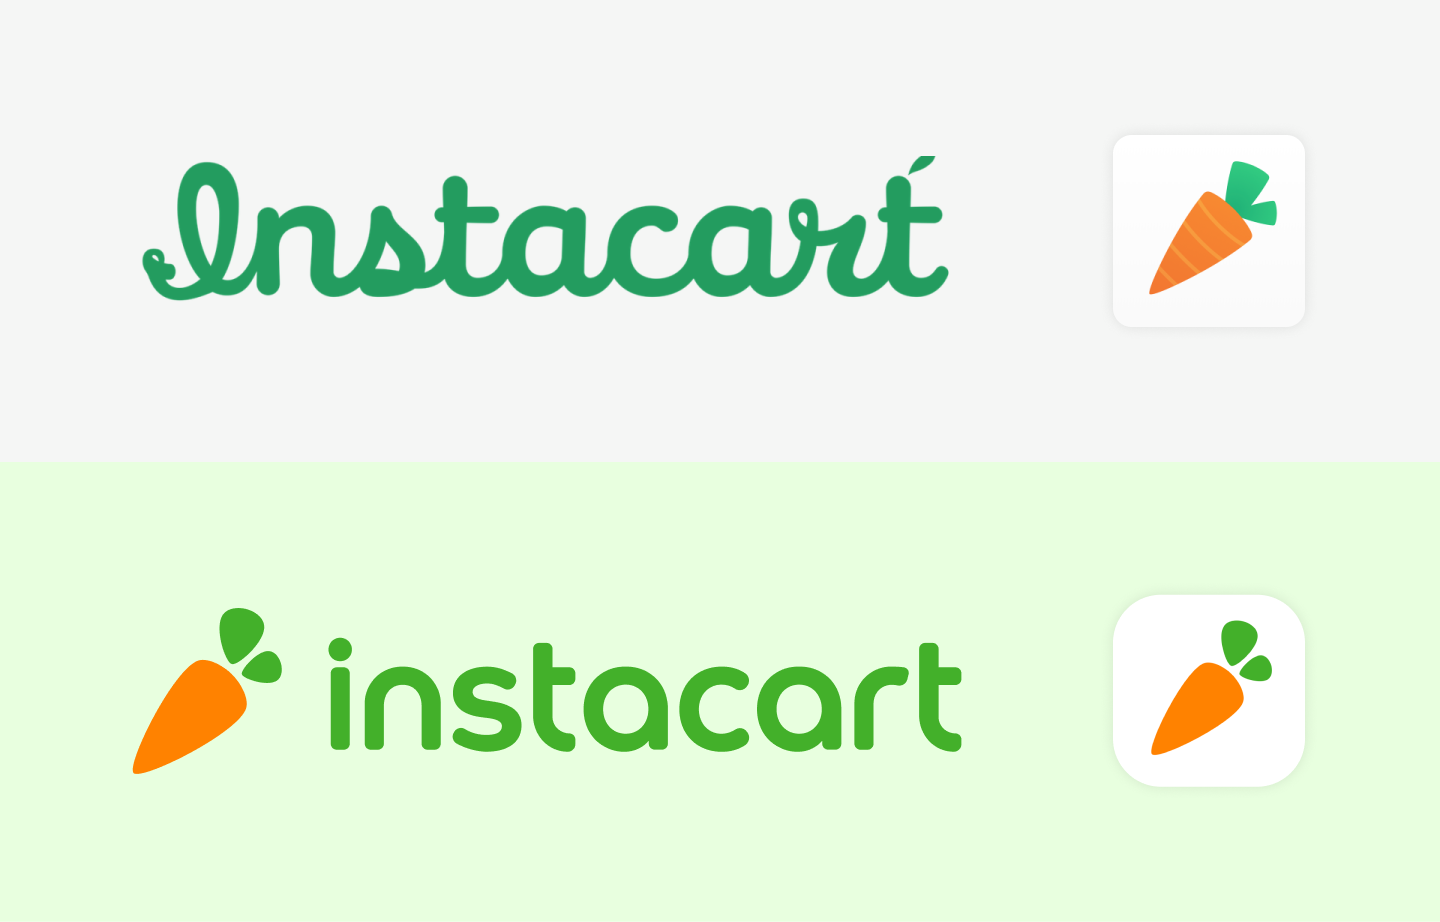 Instacart logo before and after